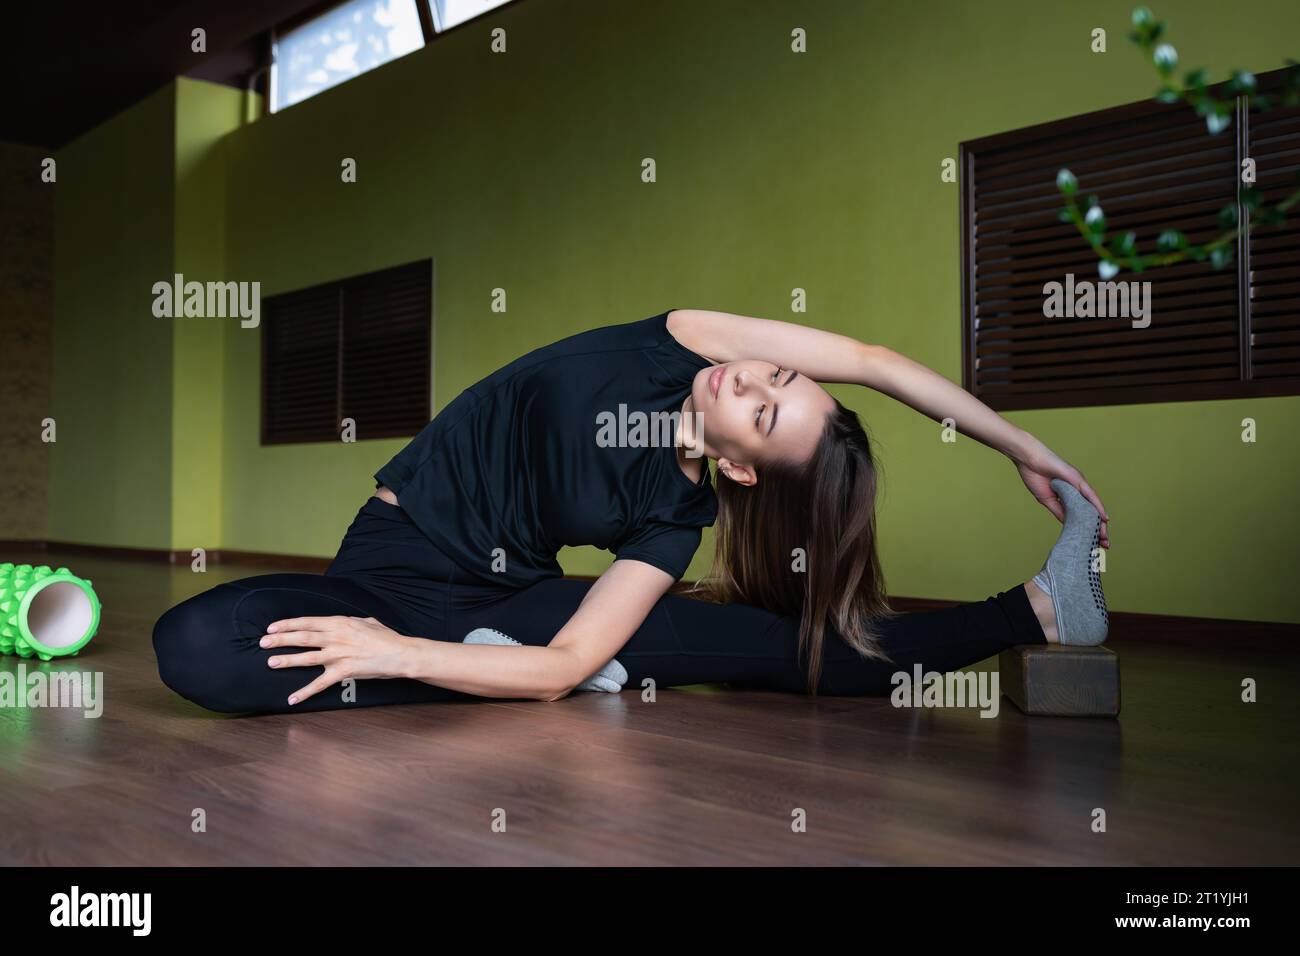 A young woman leading a healthy lifestyle and practicing yoga performs the Parivritta Janu Shirshasana exercise, an inverted head-to-knee tilt, traini Stock Photo